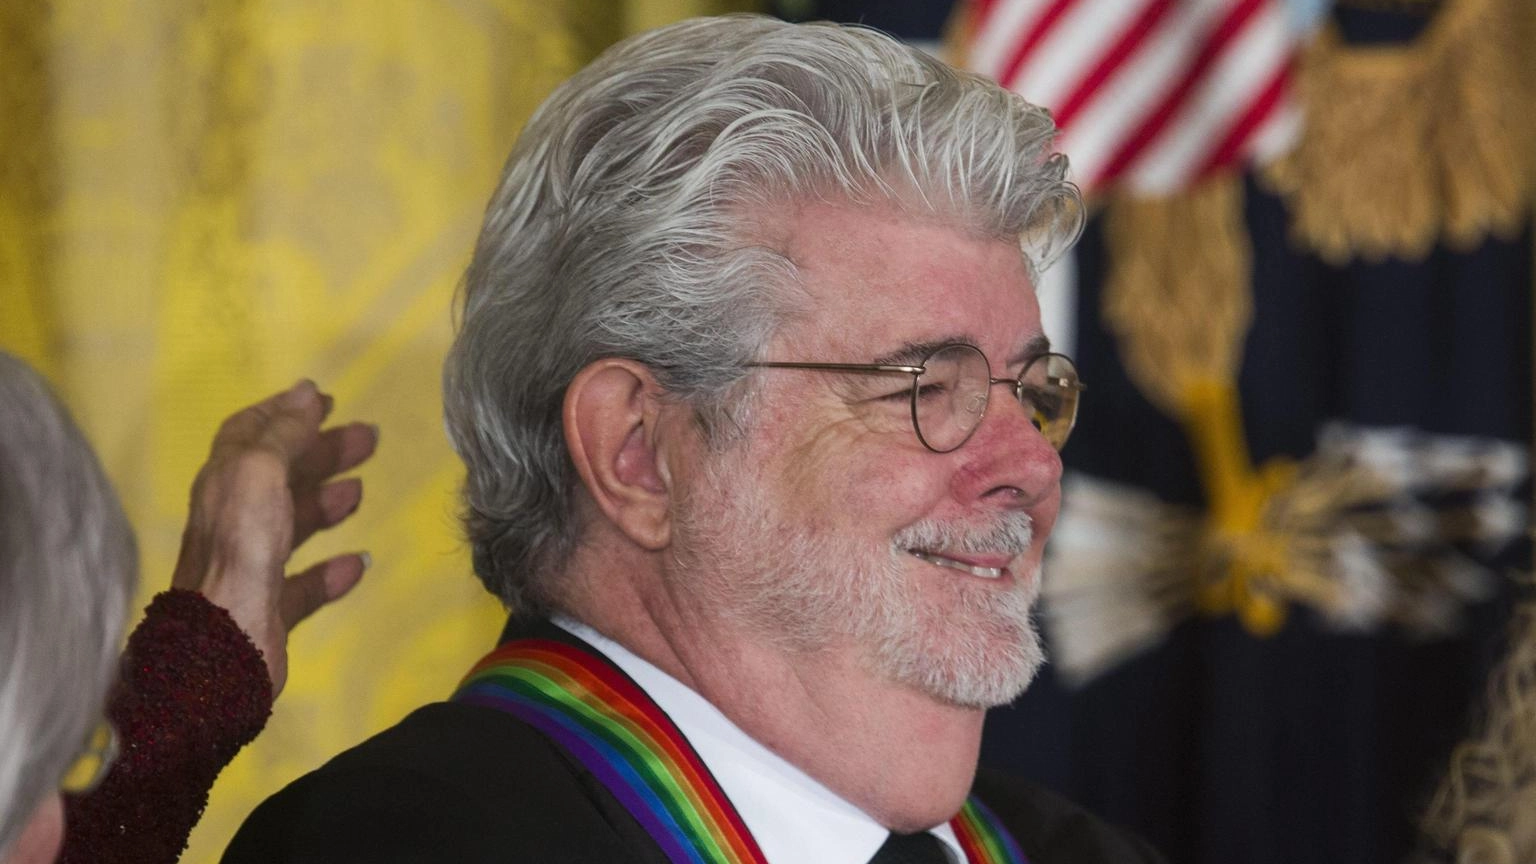 A George Lucas la Palma d'Oro ad onore a Cannes